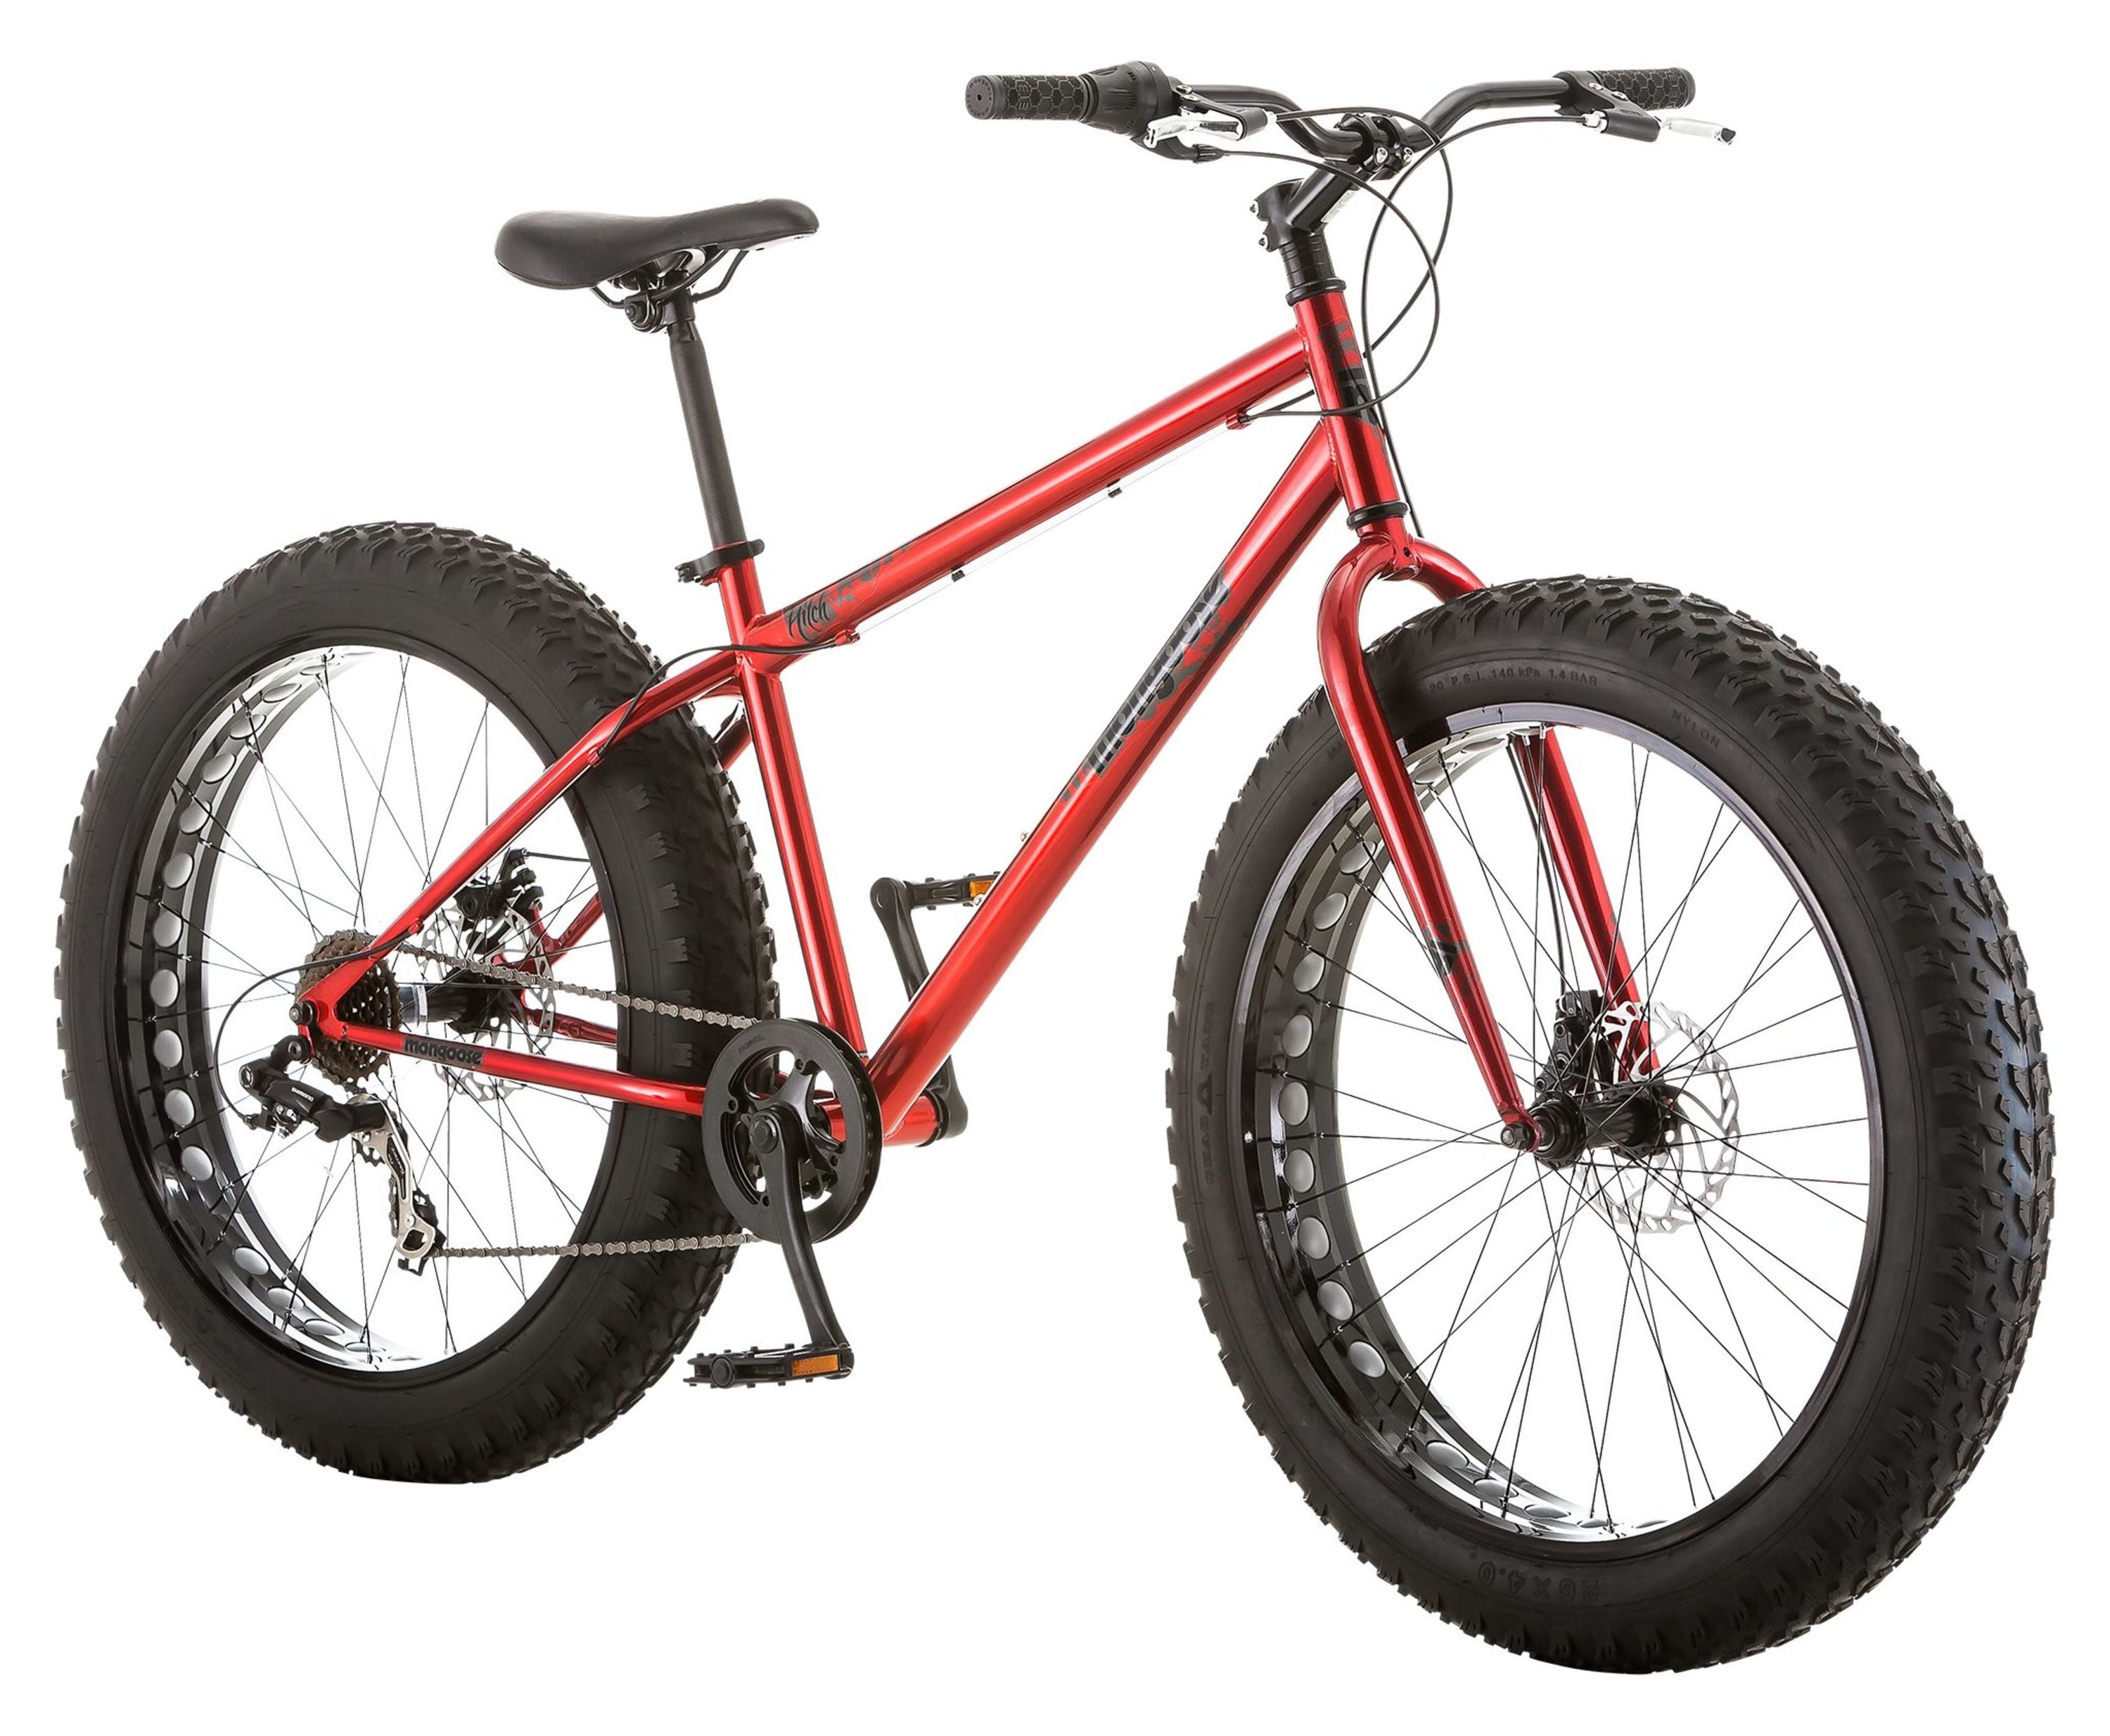 Mongoose Hitch All-Terrain Fat Tire Bike, 26-inch wheels, Men's Style, Red - image 1 of 5